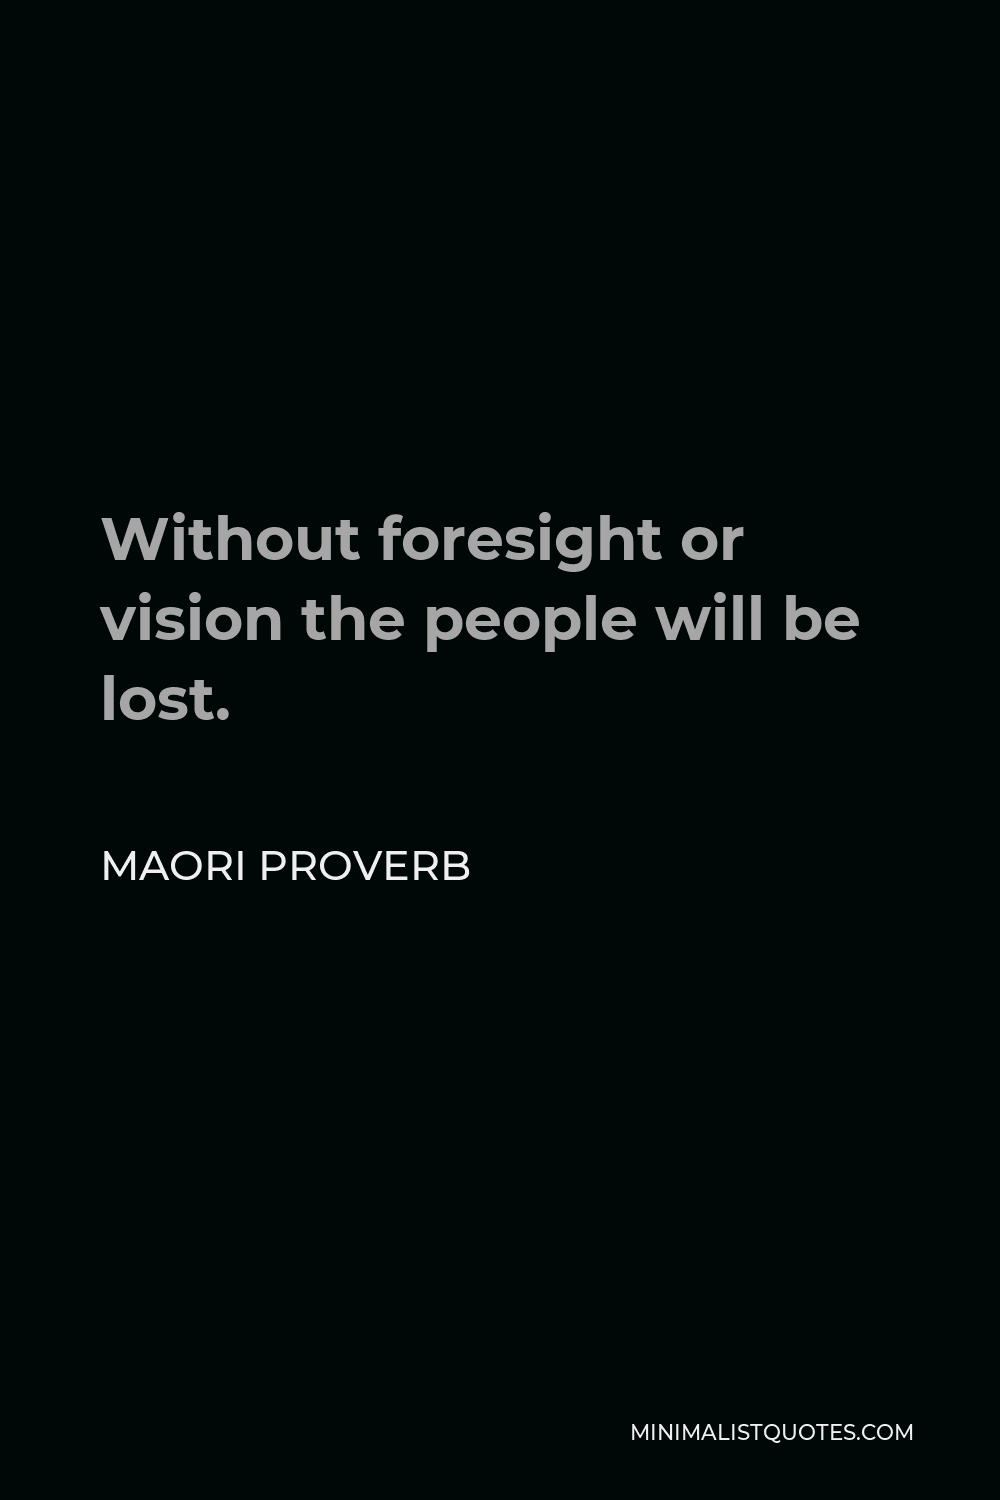 Maori Proverb Quote - Without foresight or vision the people will be lost.